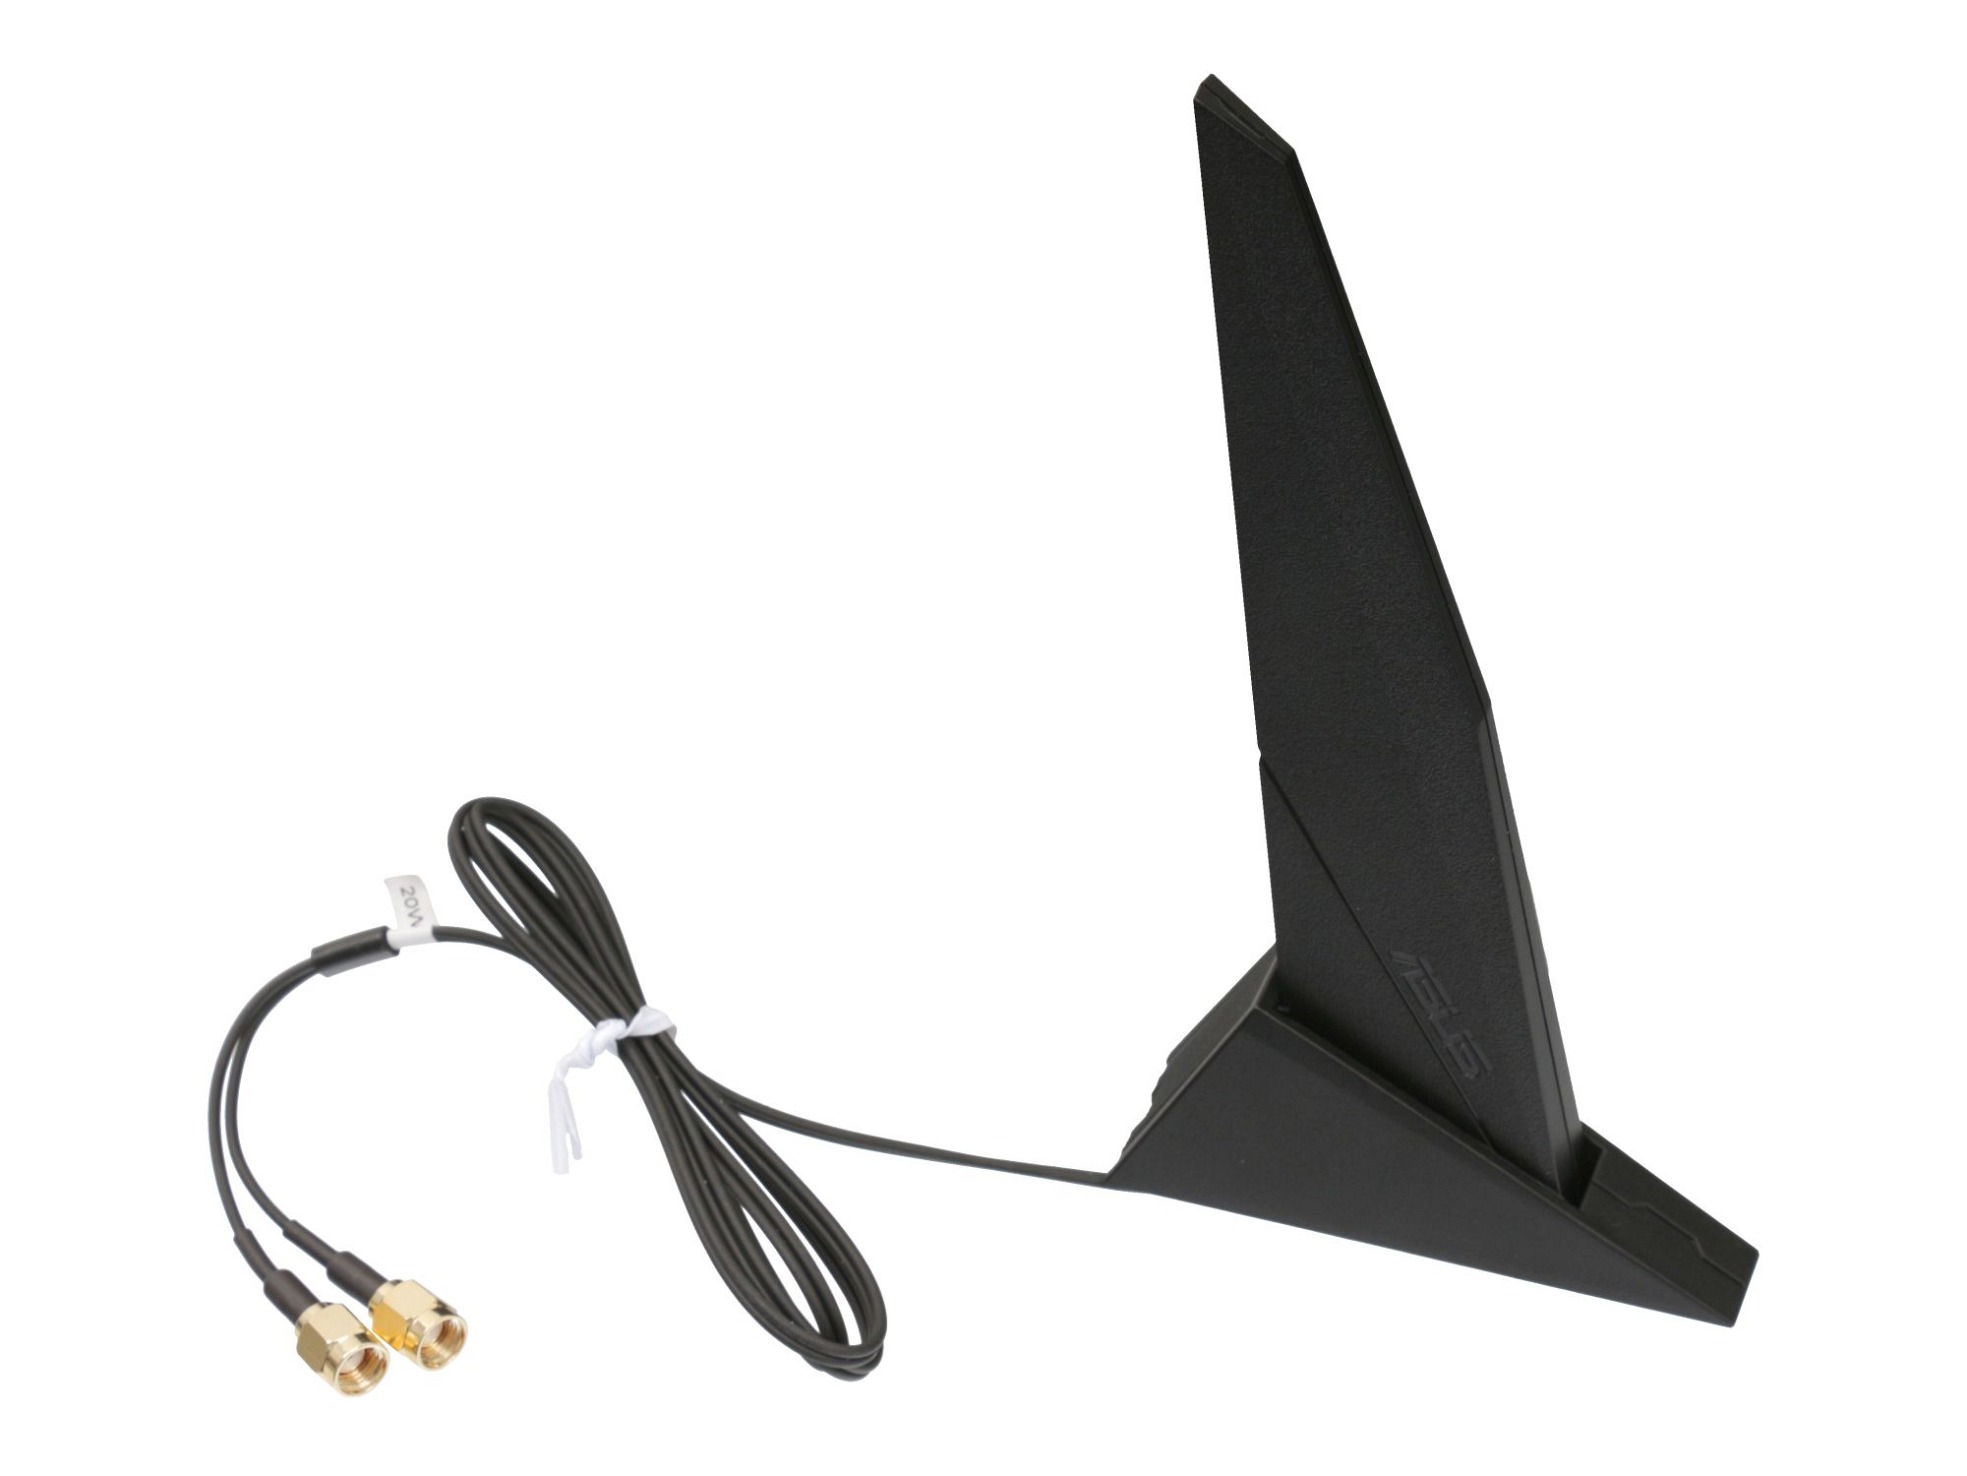 Externe Asus RP-SMA DIPOLE Antenne für Asus TUF GAMING X570-PRO